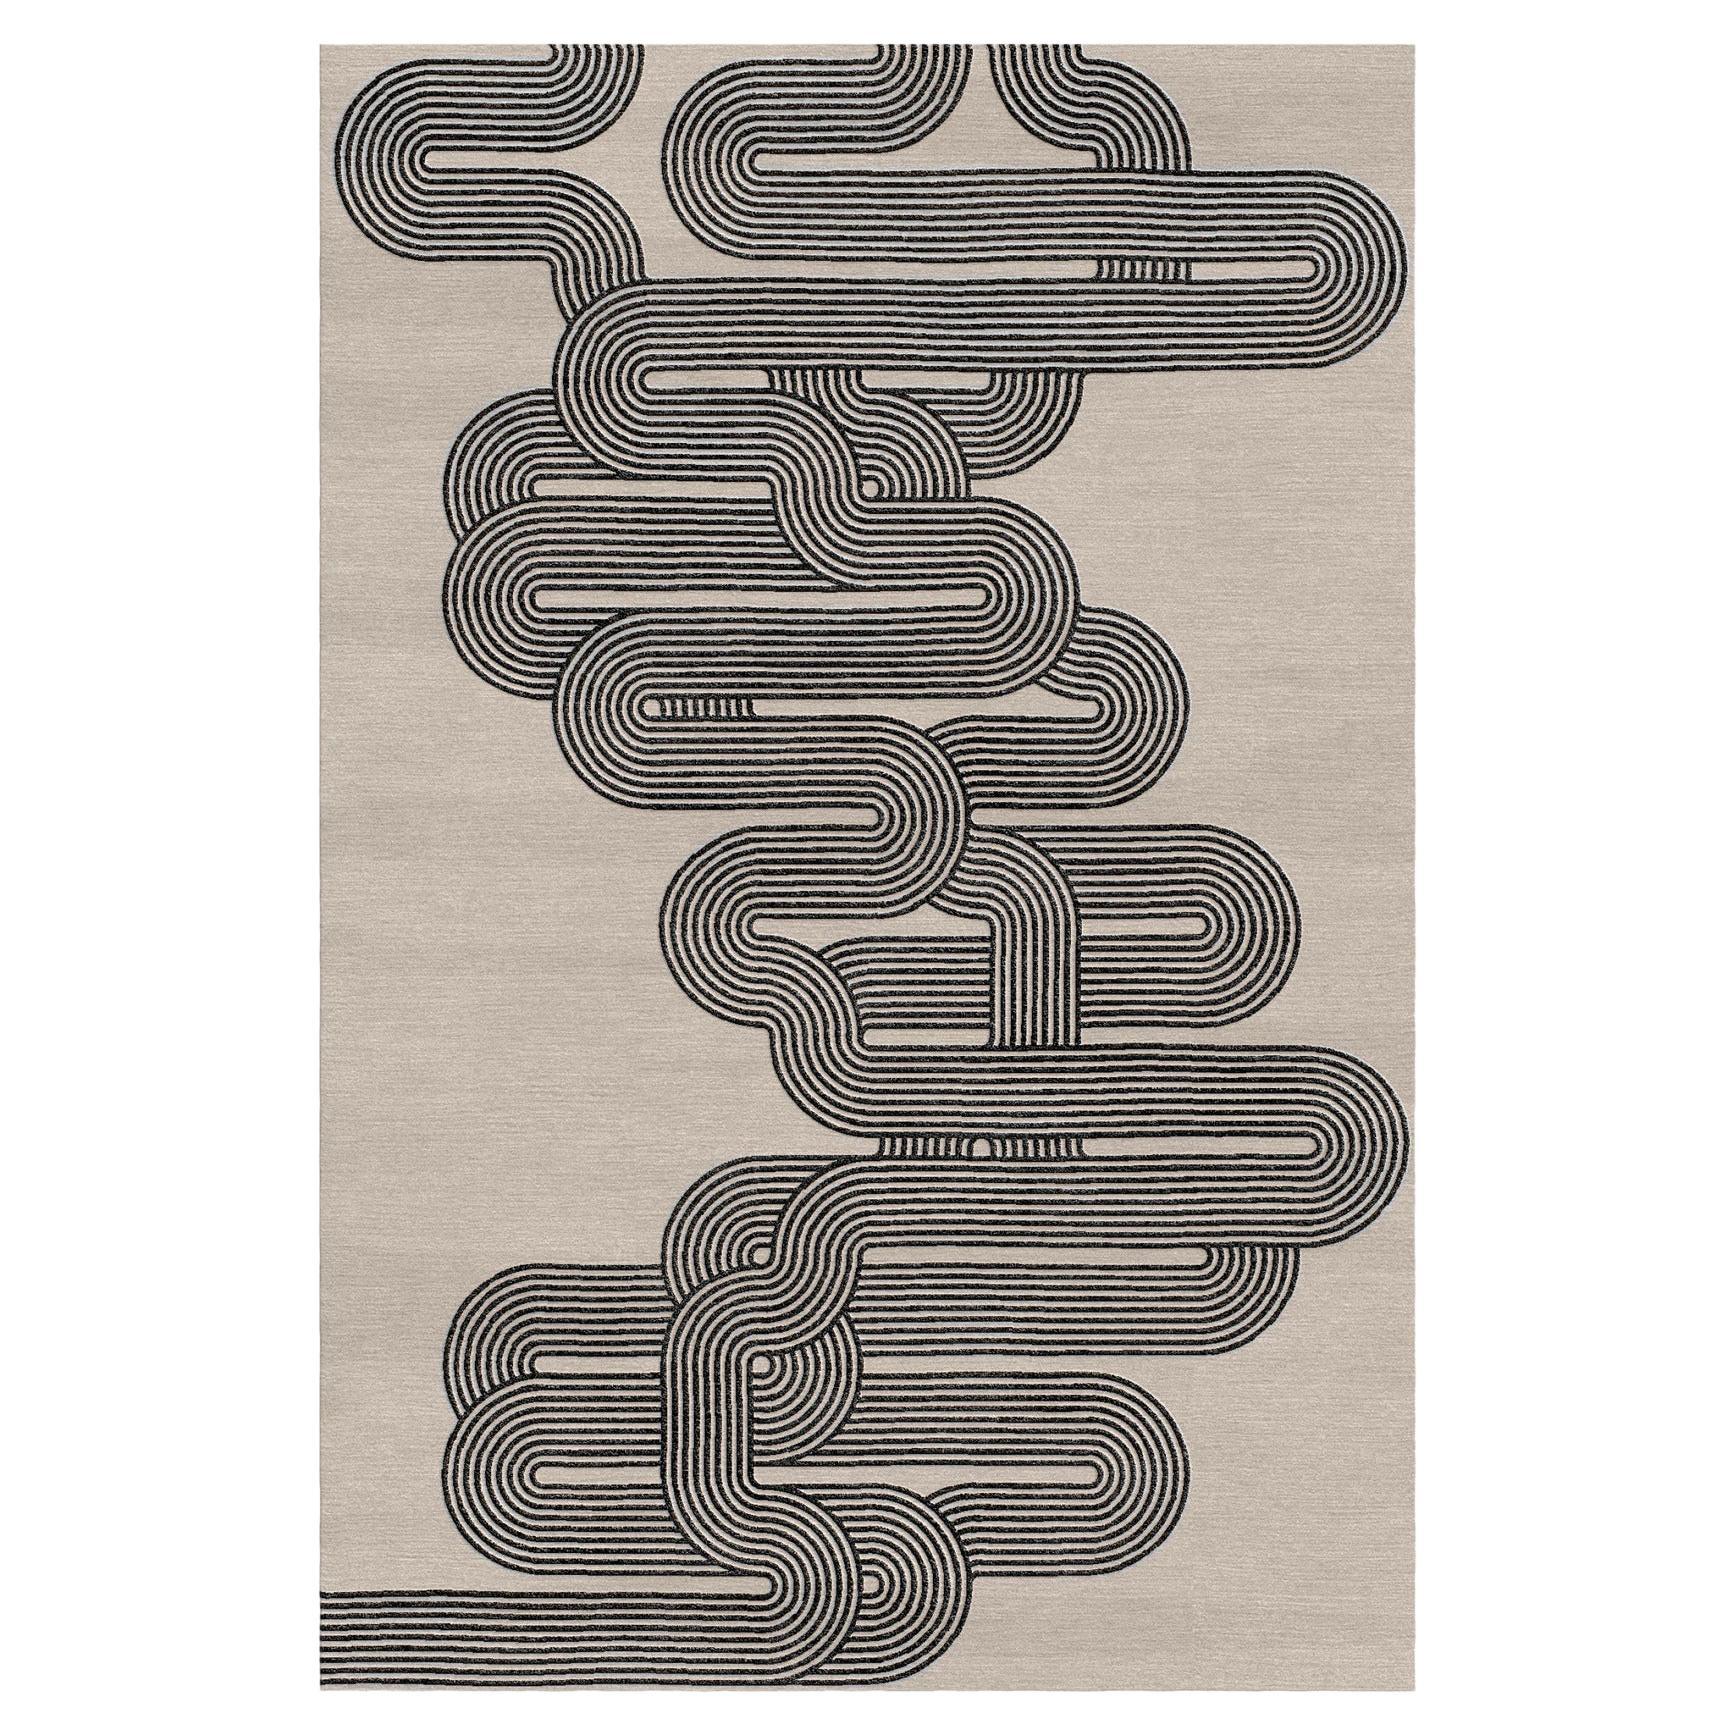 Curve Hand-Tufted Mid-Century Style Beige Rug by Giulio Brambilla